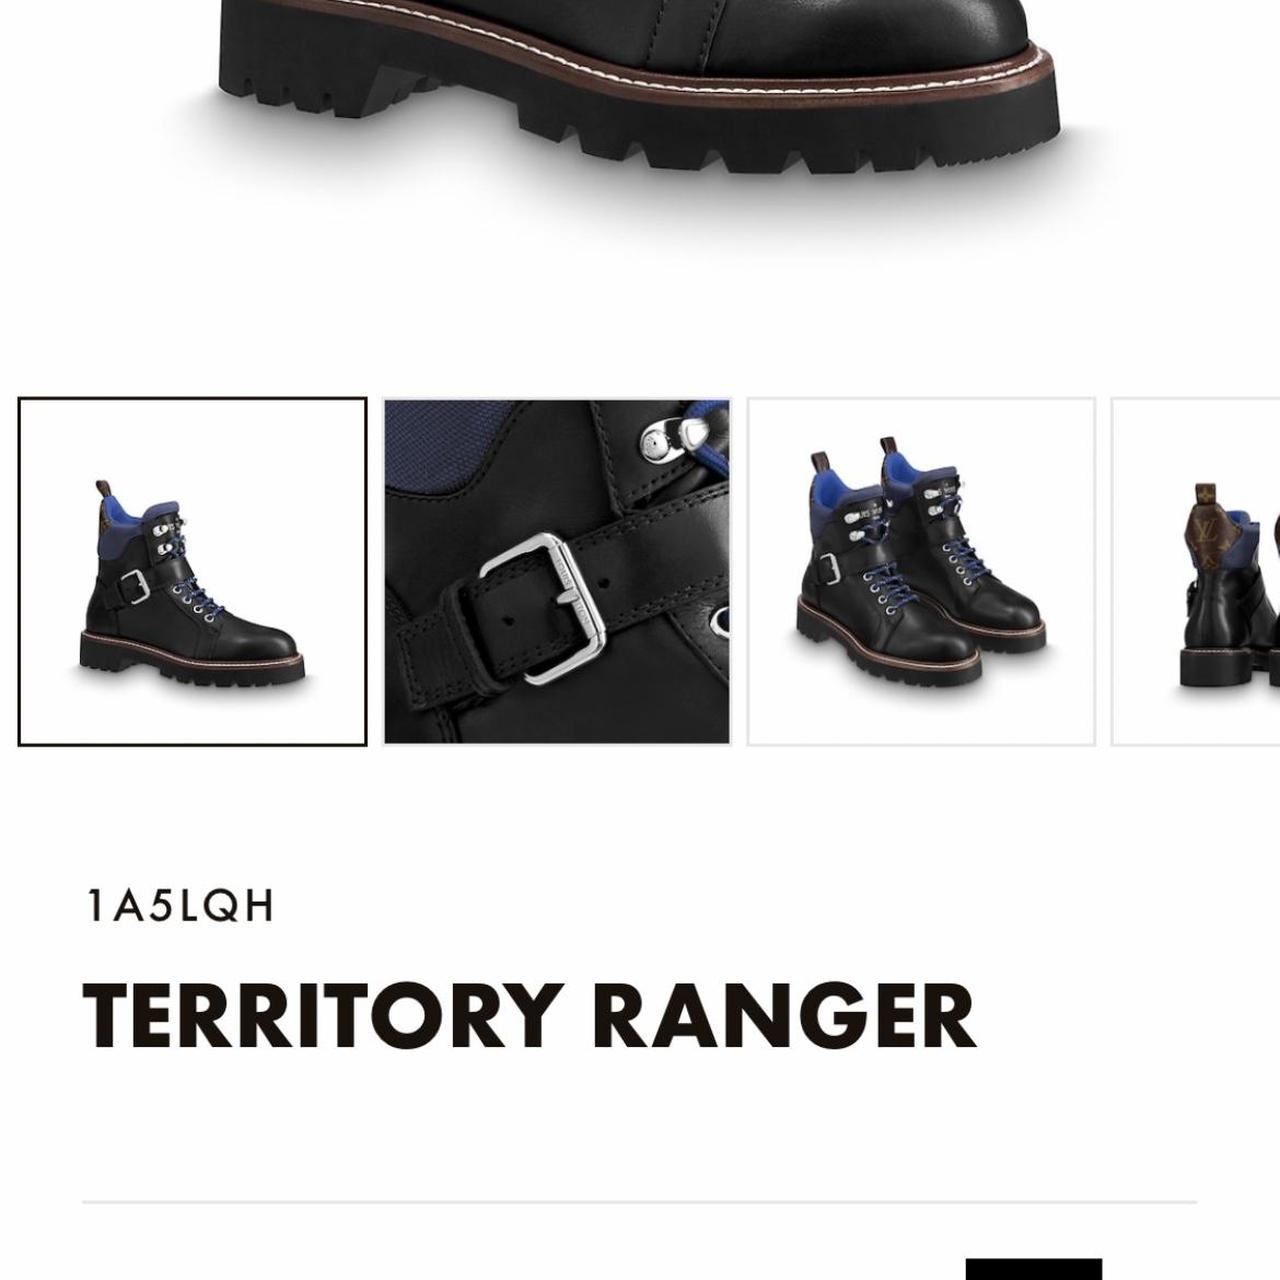 Louis Vuitton Ranger Boots - 3 For Sale on 1stDibs  lv ranger ankle boot, louis  vuitton territory flat ranger boots, lv ranger boots